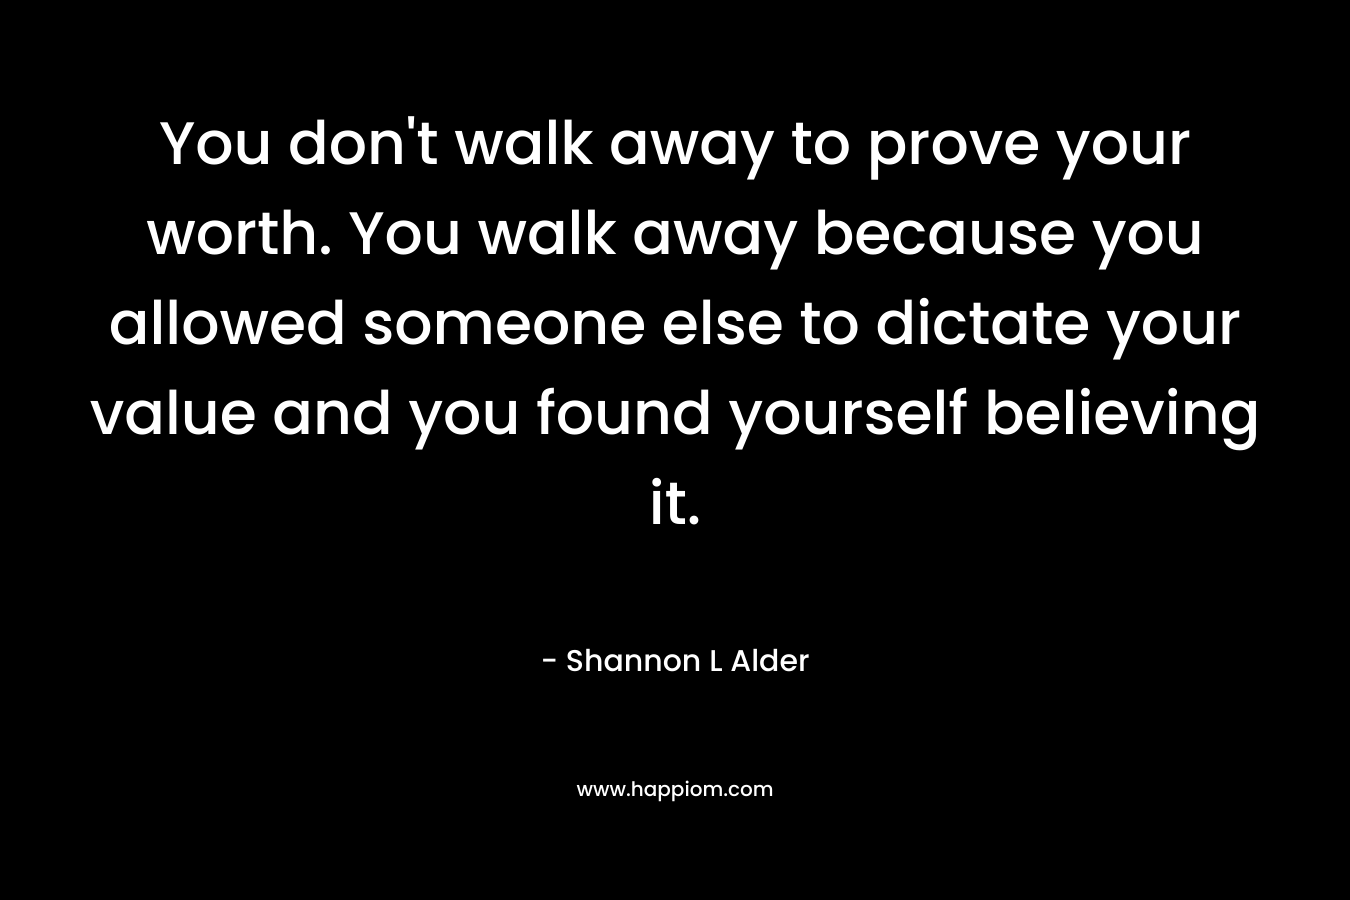 You don't walk away to prove your worth. You walk away because you allowed someone else to dictate your value and you found yourself believing it.